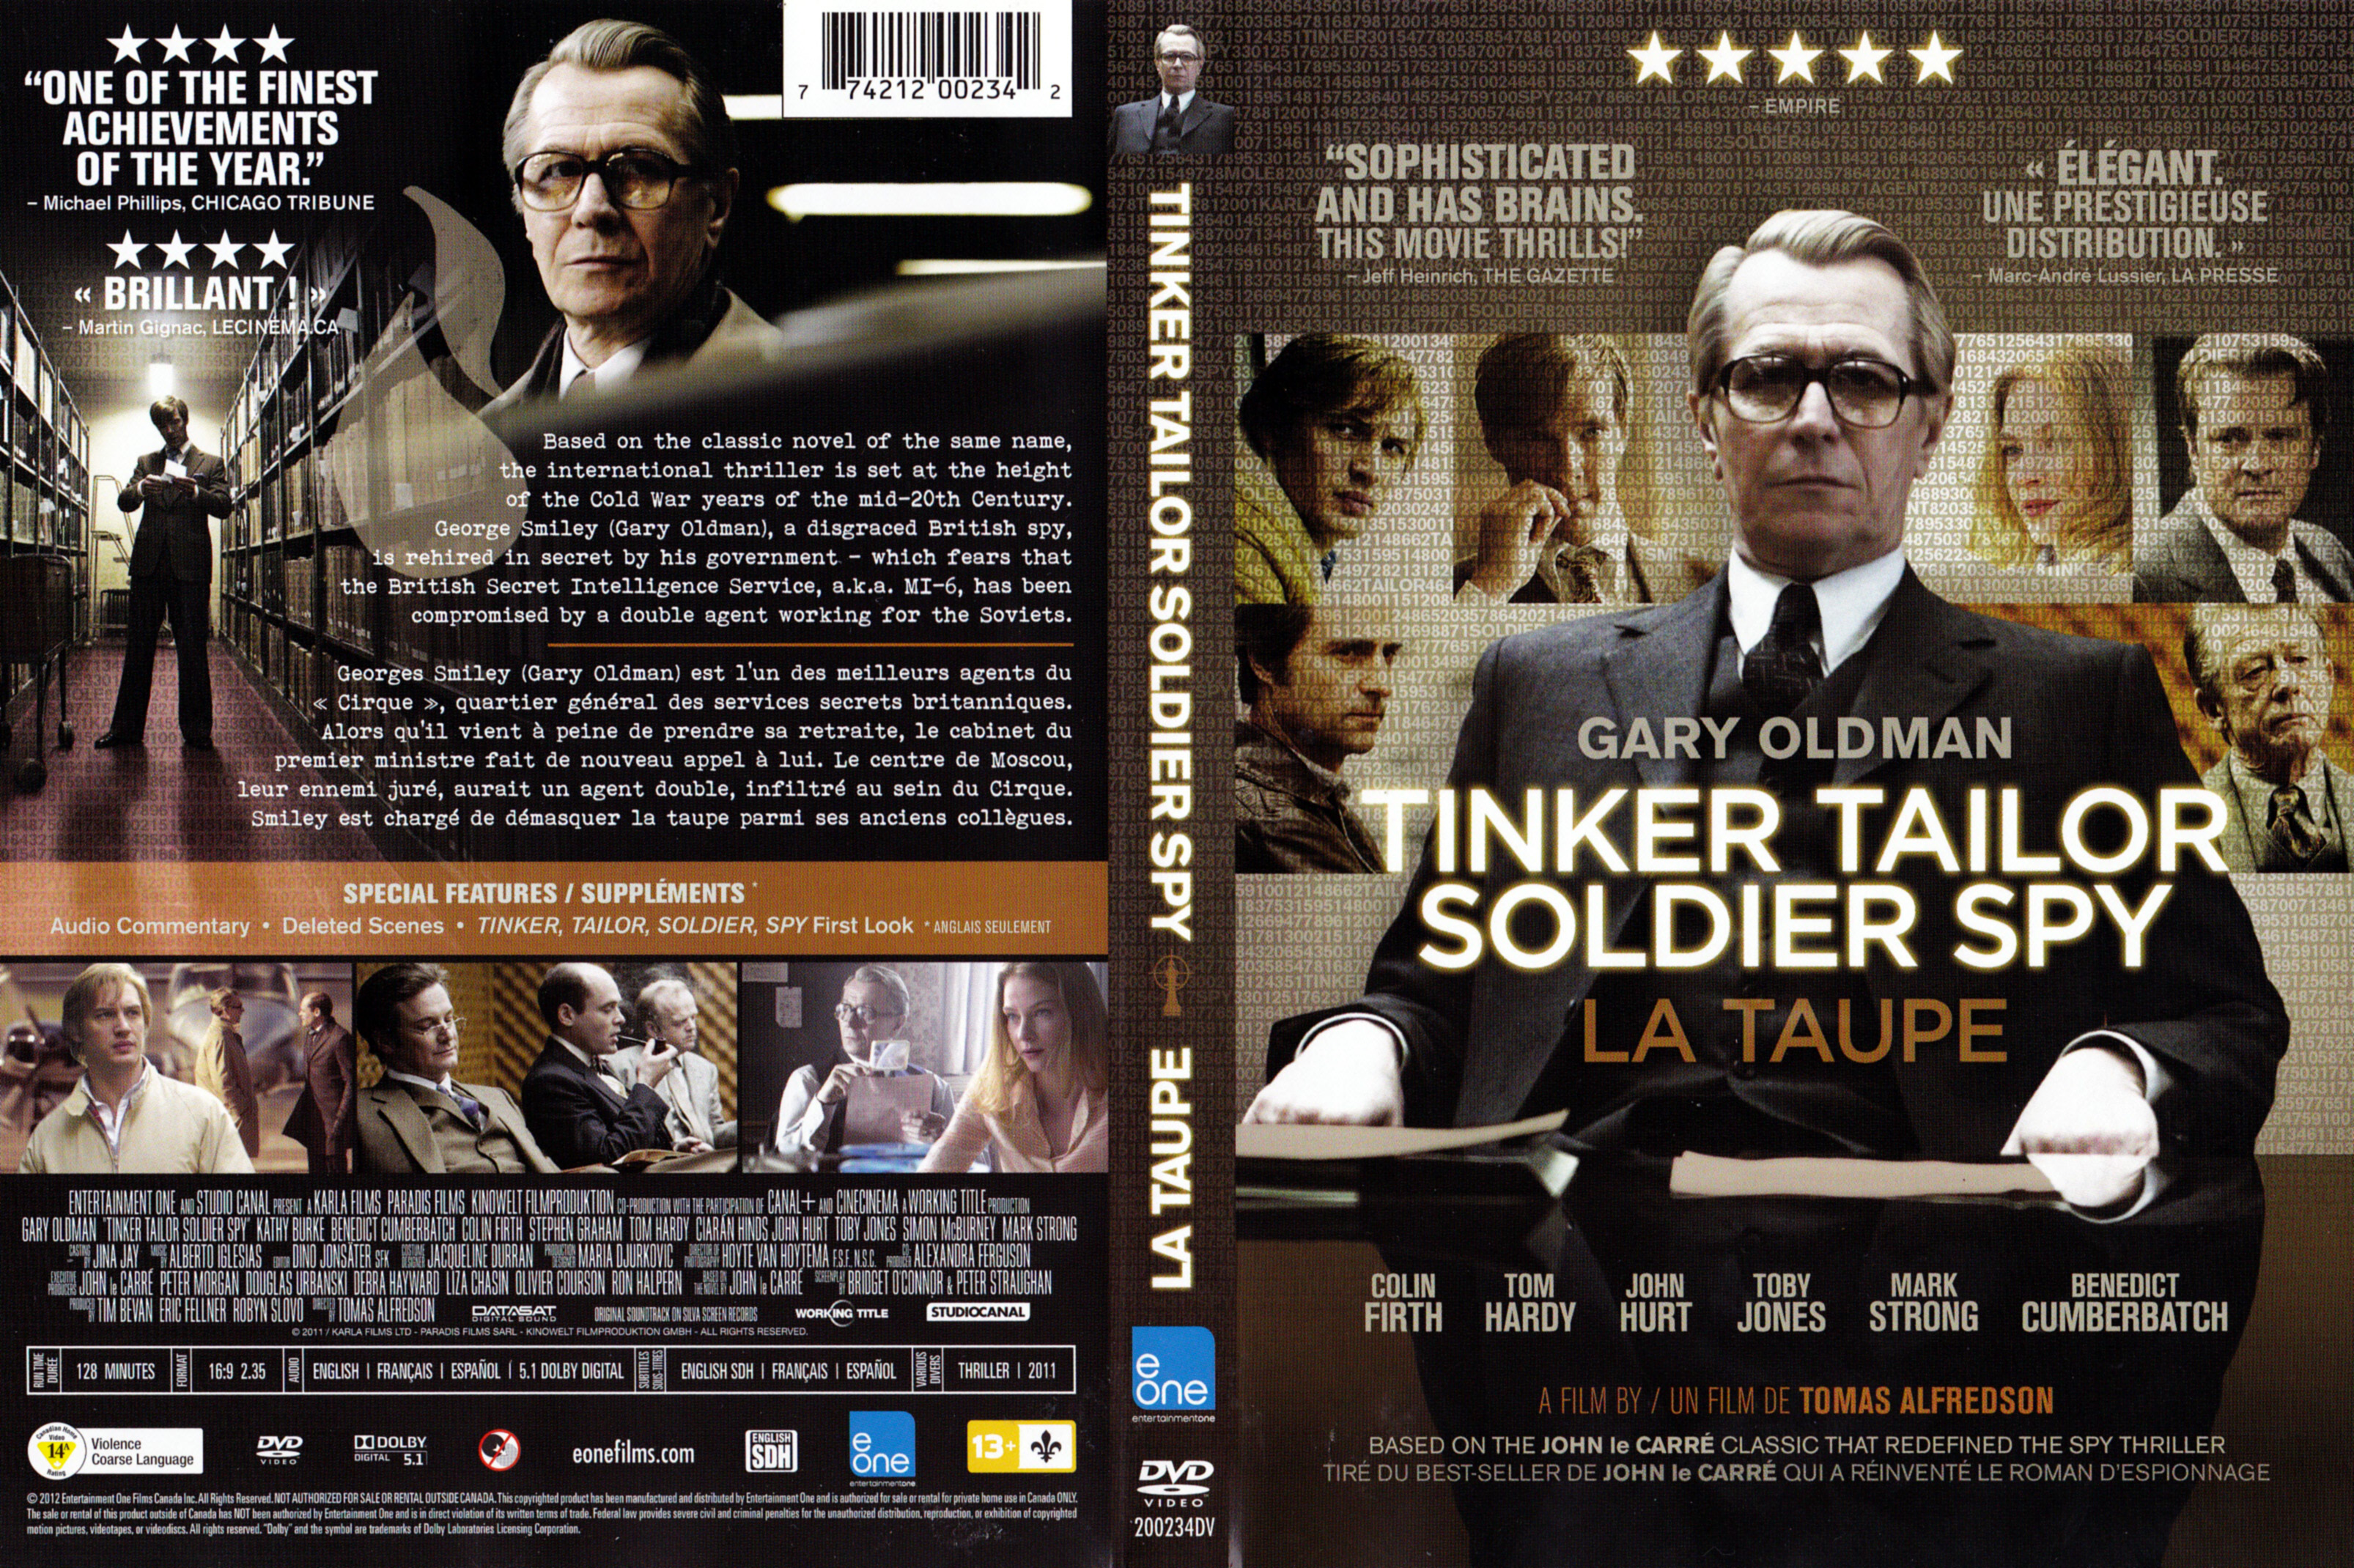 Jaquette DVD La taupe - Tinker tailor soldier spy (Canadienne)